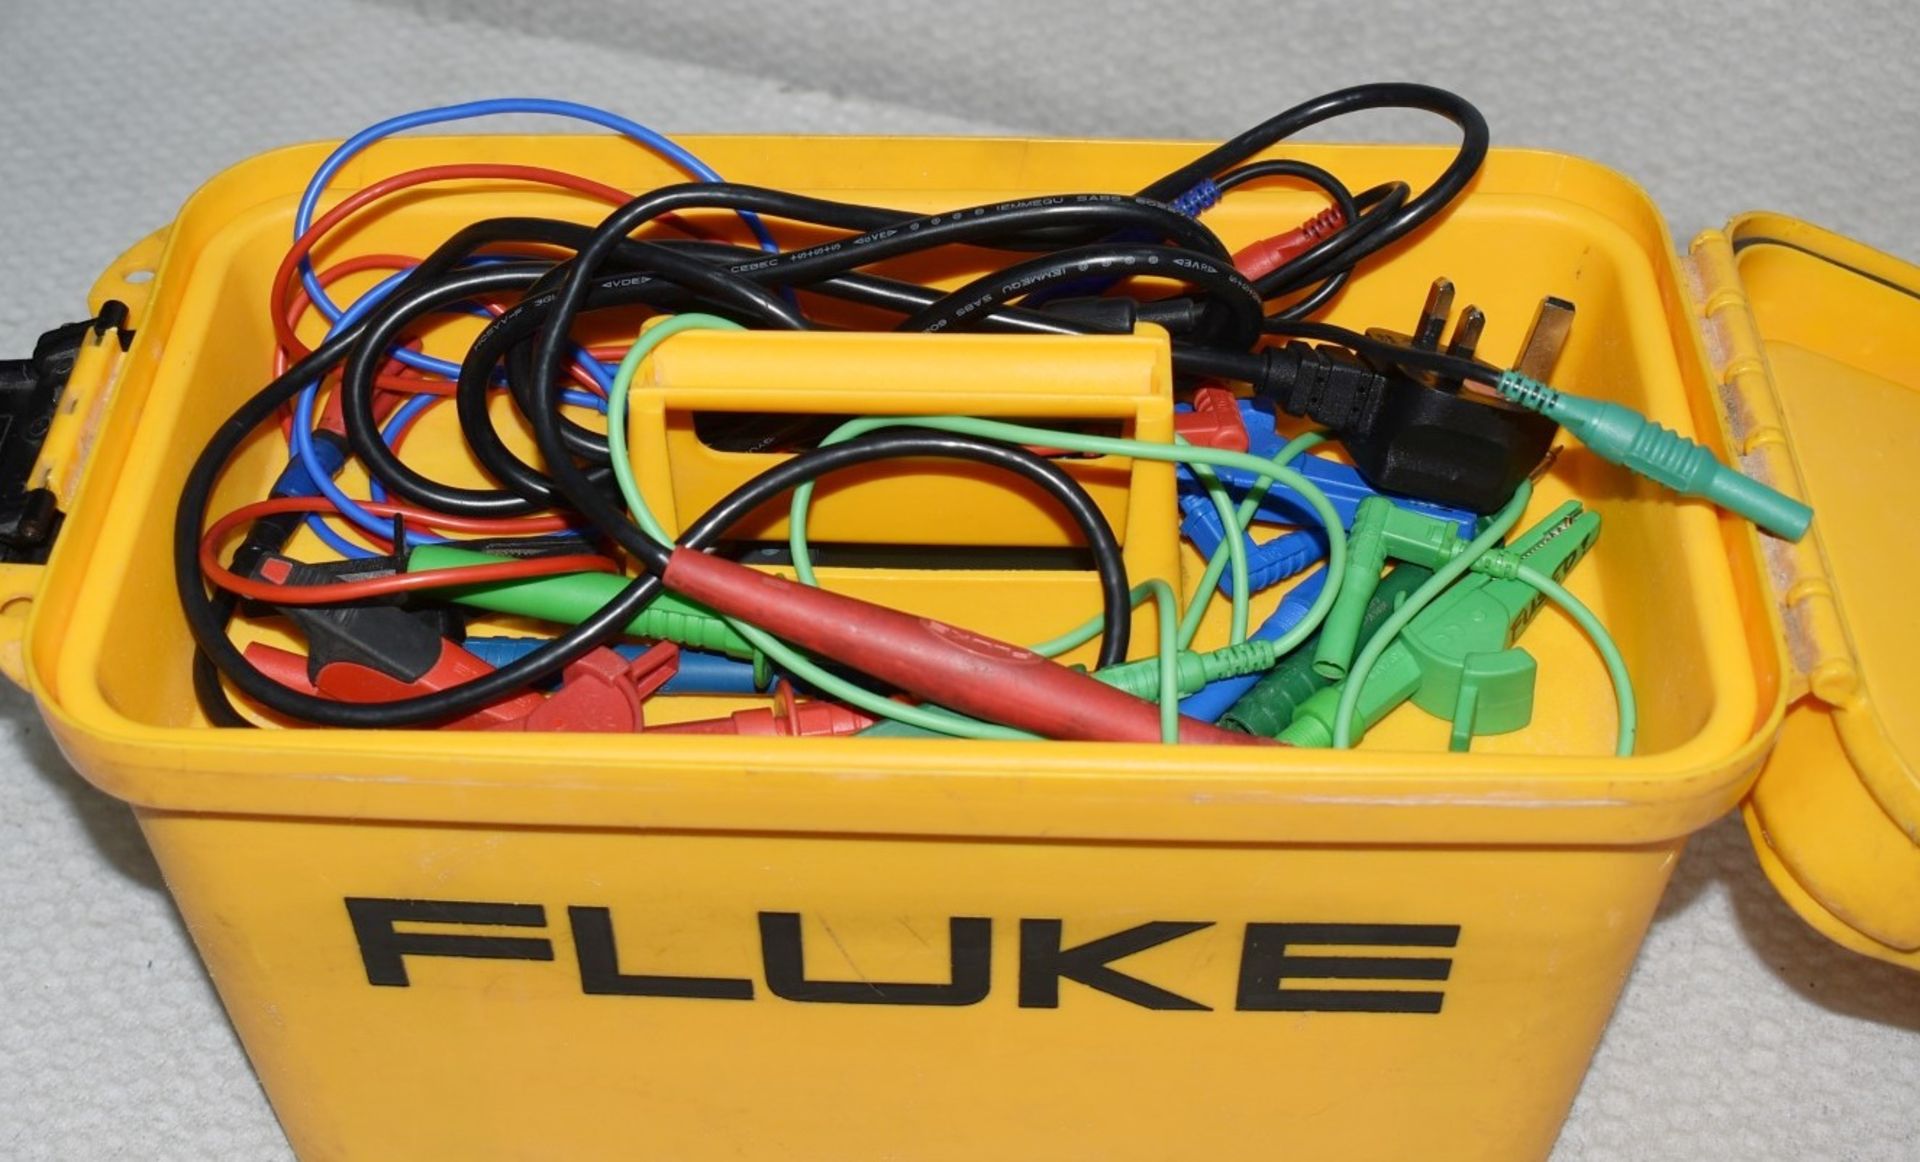 1 x FLUKE 1653B Multifunction Electrical installation Safety Tester With Portable Hard Carry - Image 2 of 3